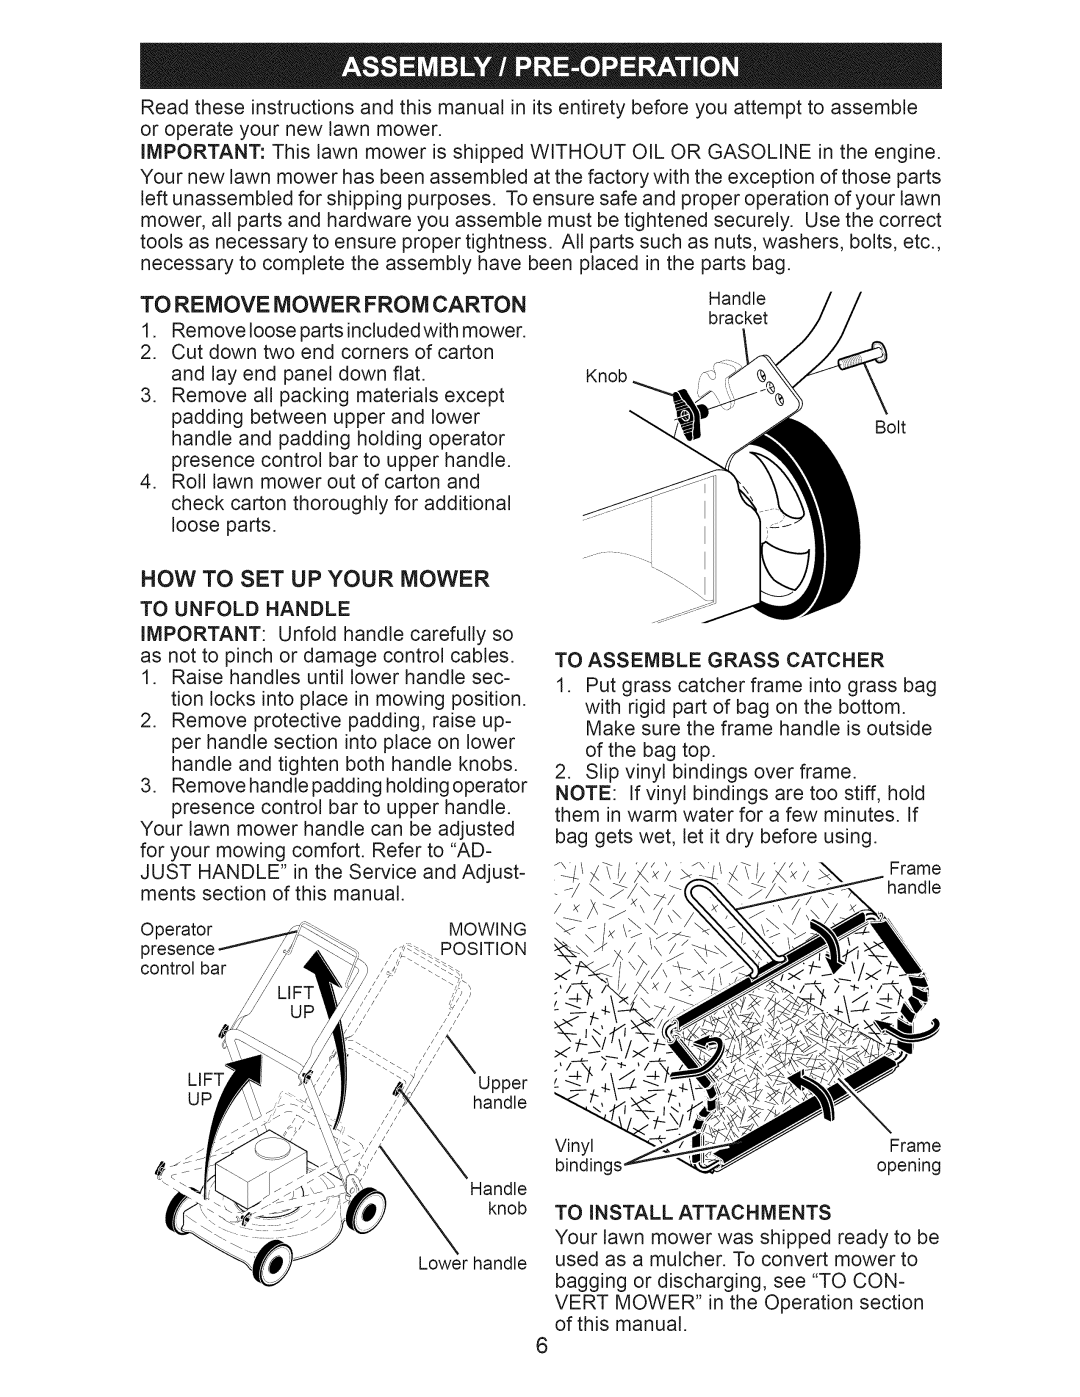 Craftsman 917.376405 owner manual To Remove Mower From Carton, Now To Set Up Your Mower 